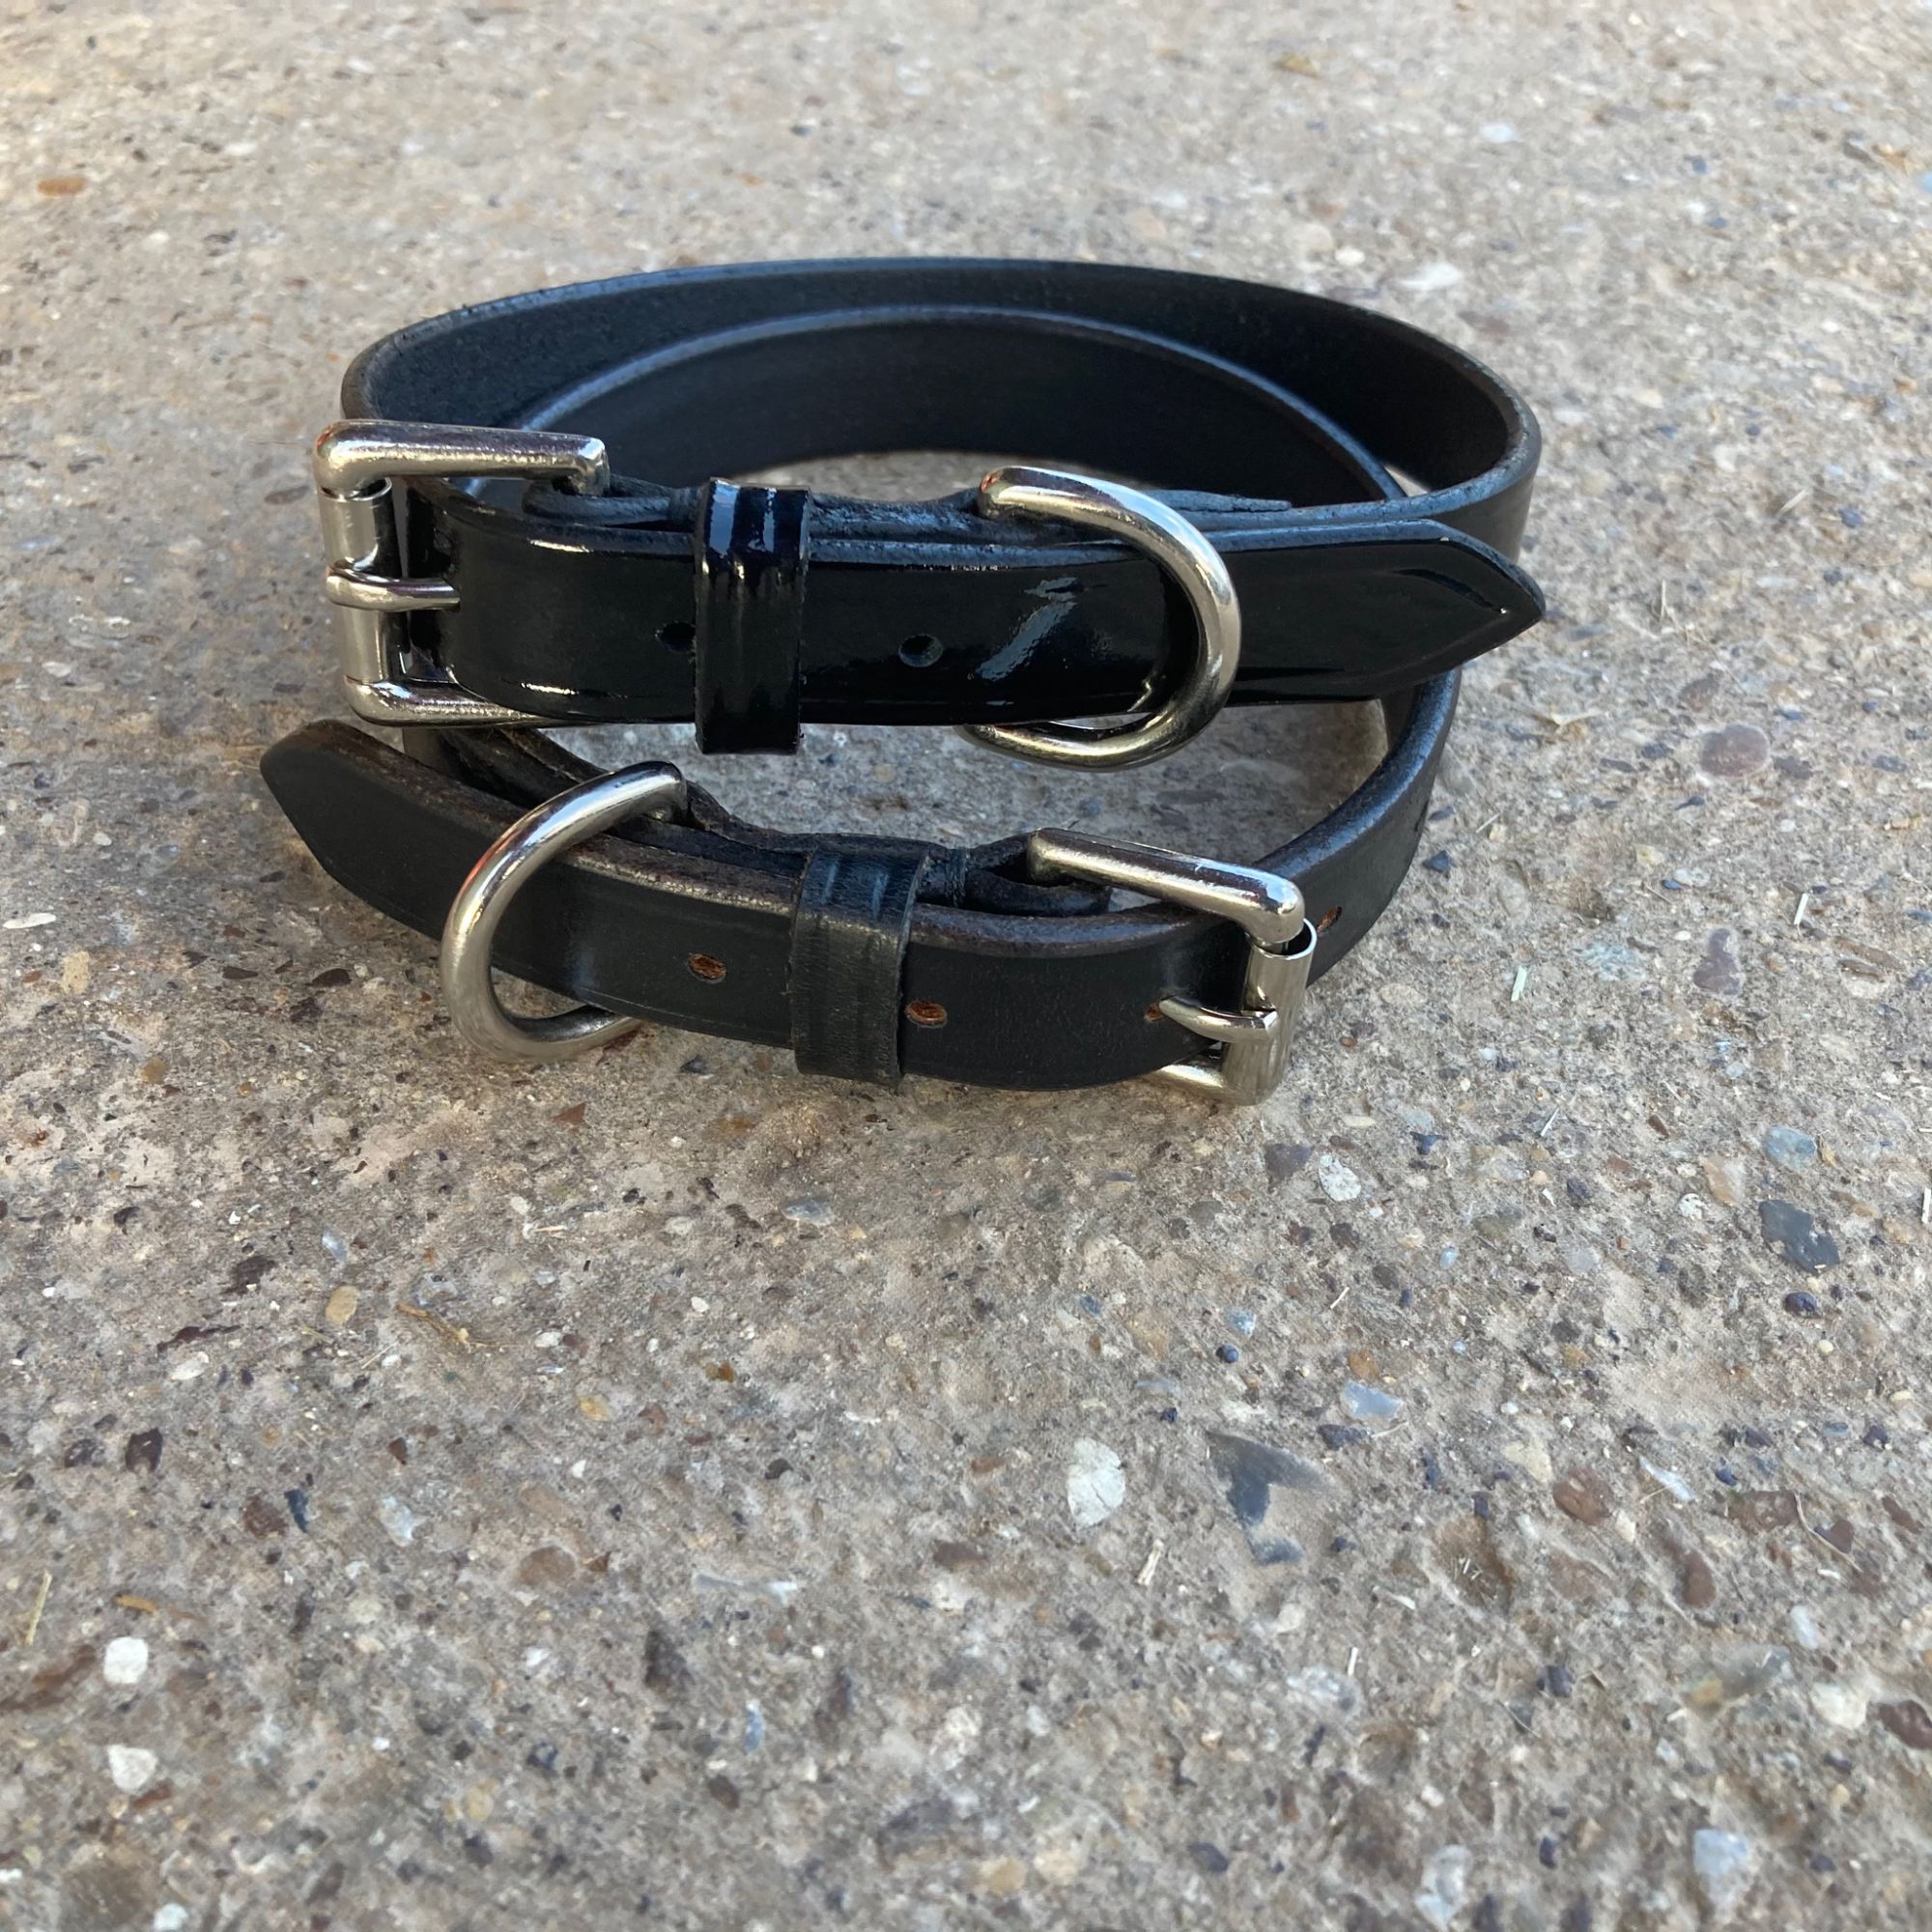 Black bridle leather and black patent leather collars